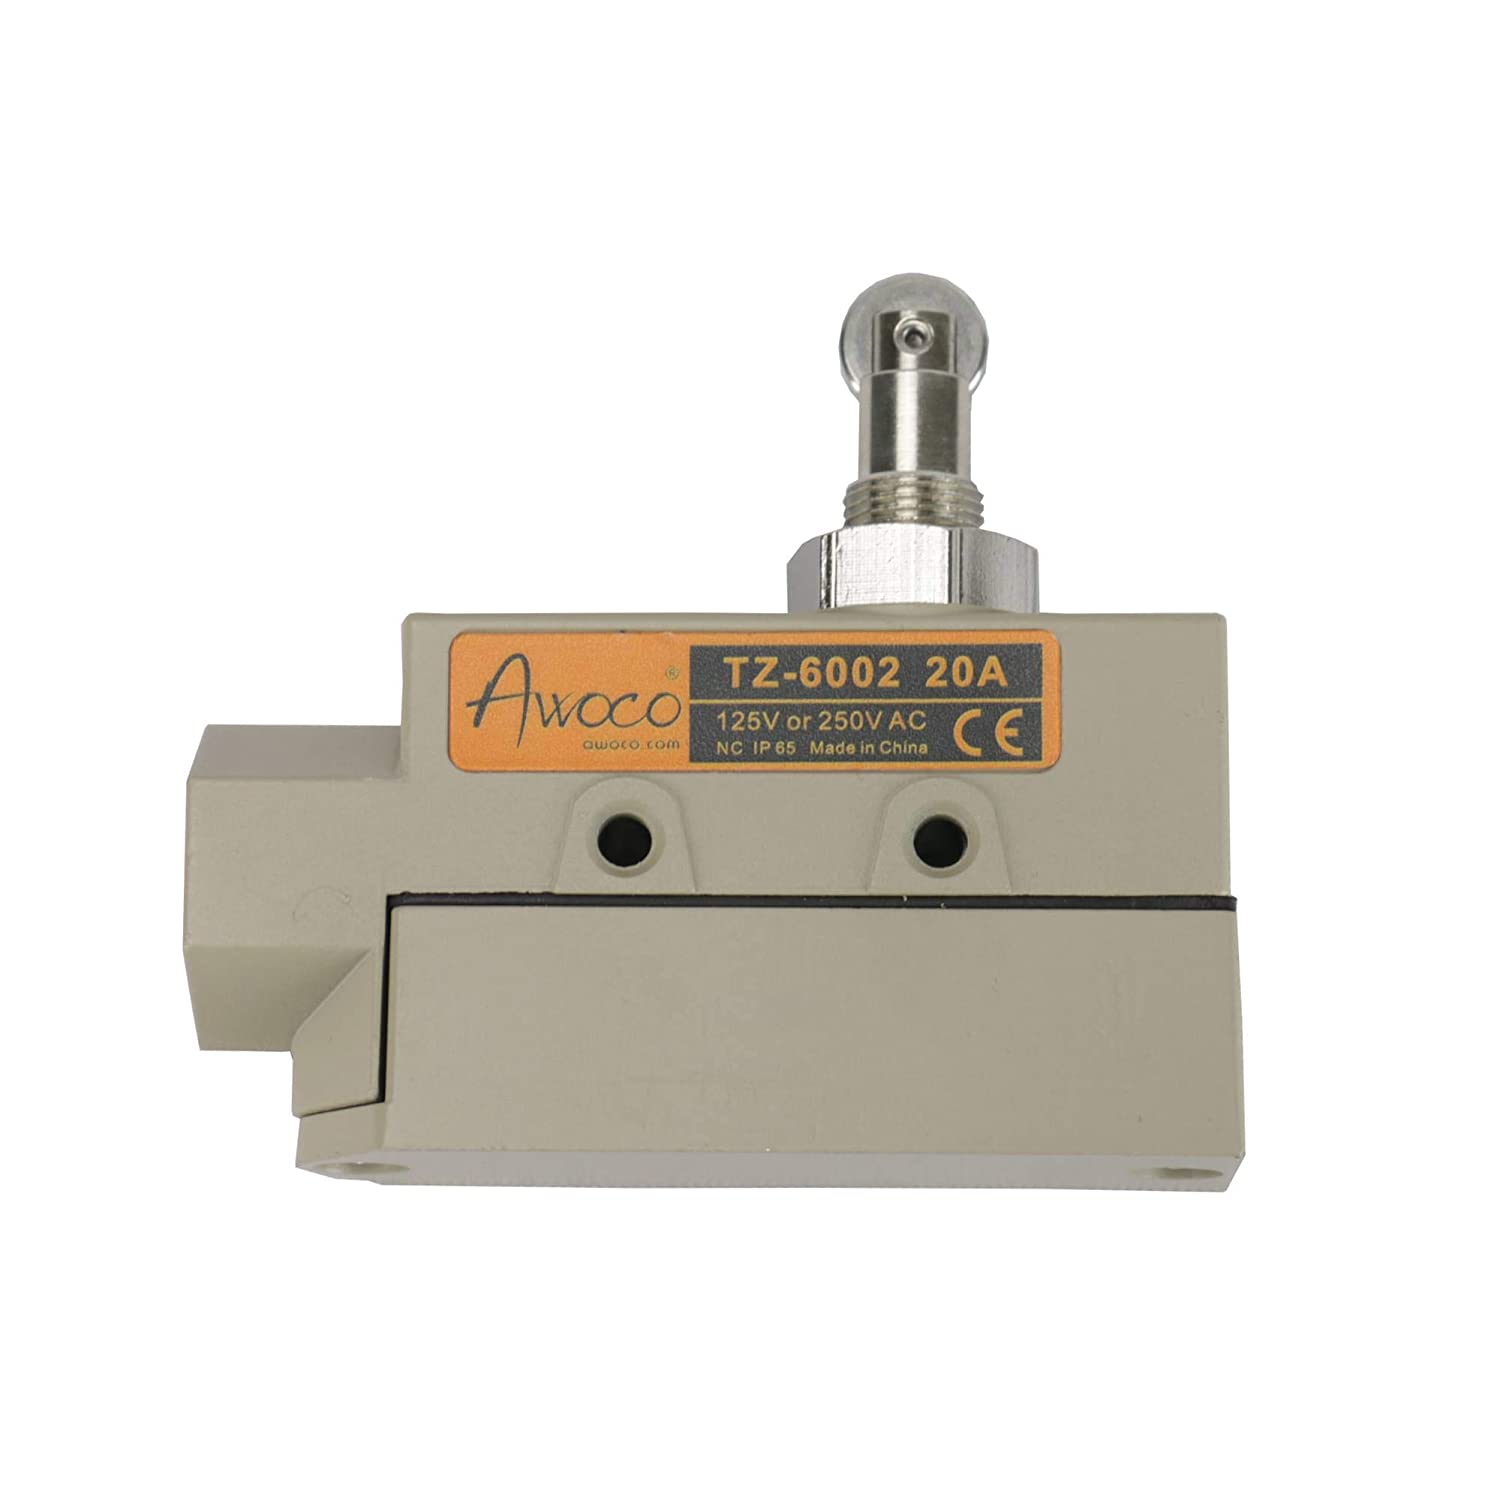 Awoco TZ-6002-20A Heavy Duty Commercial Door Micro Switch with Parallel Roller Plunger for Sliding Doors/Windows for Air Curtains, 250V 20A IP 65 Limit Switch Type NO and Type NC